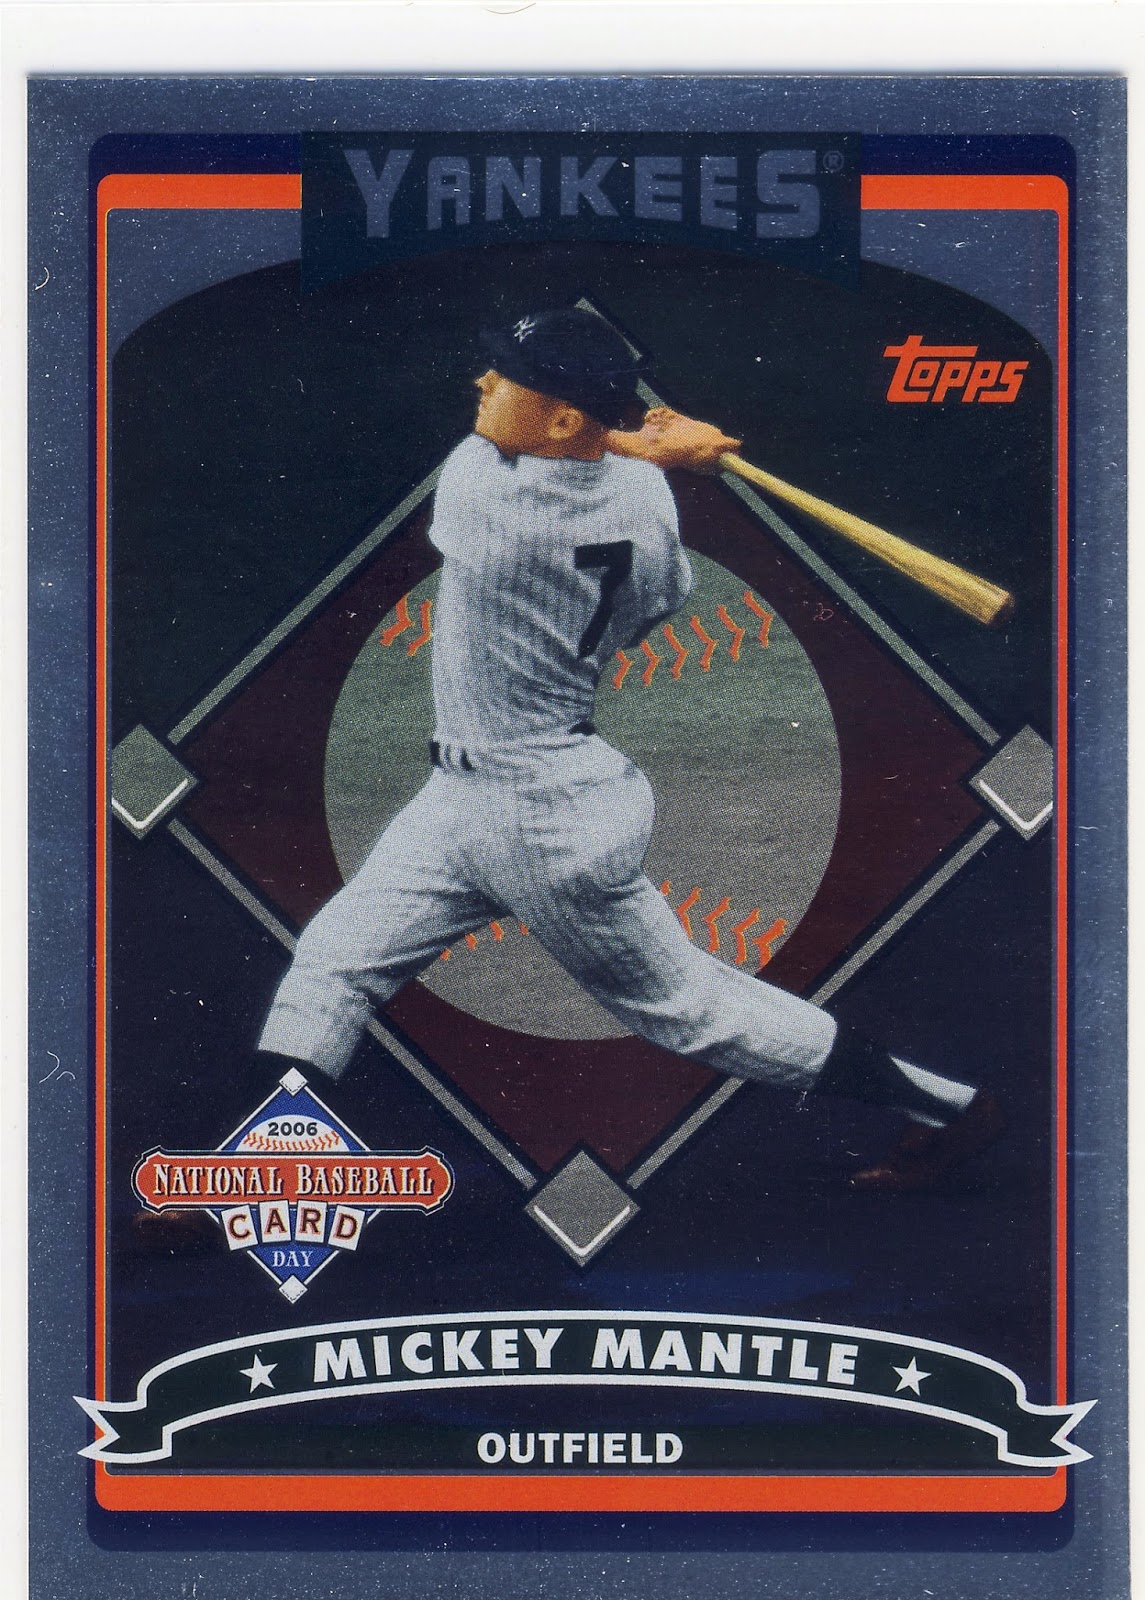 2006 Topps National Baseball Card Day #T2 Mickey Mantle.